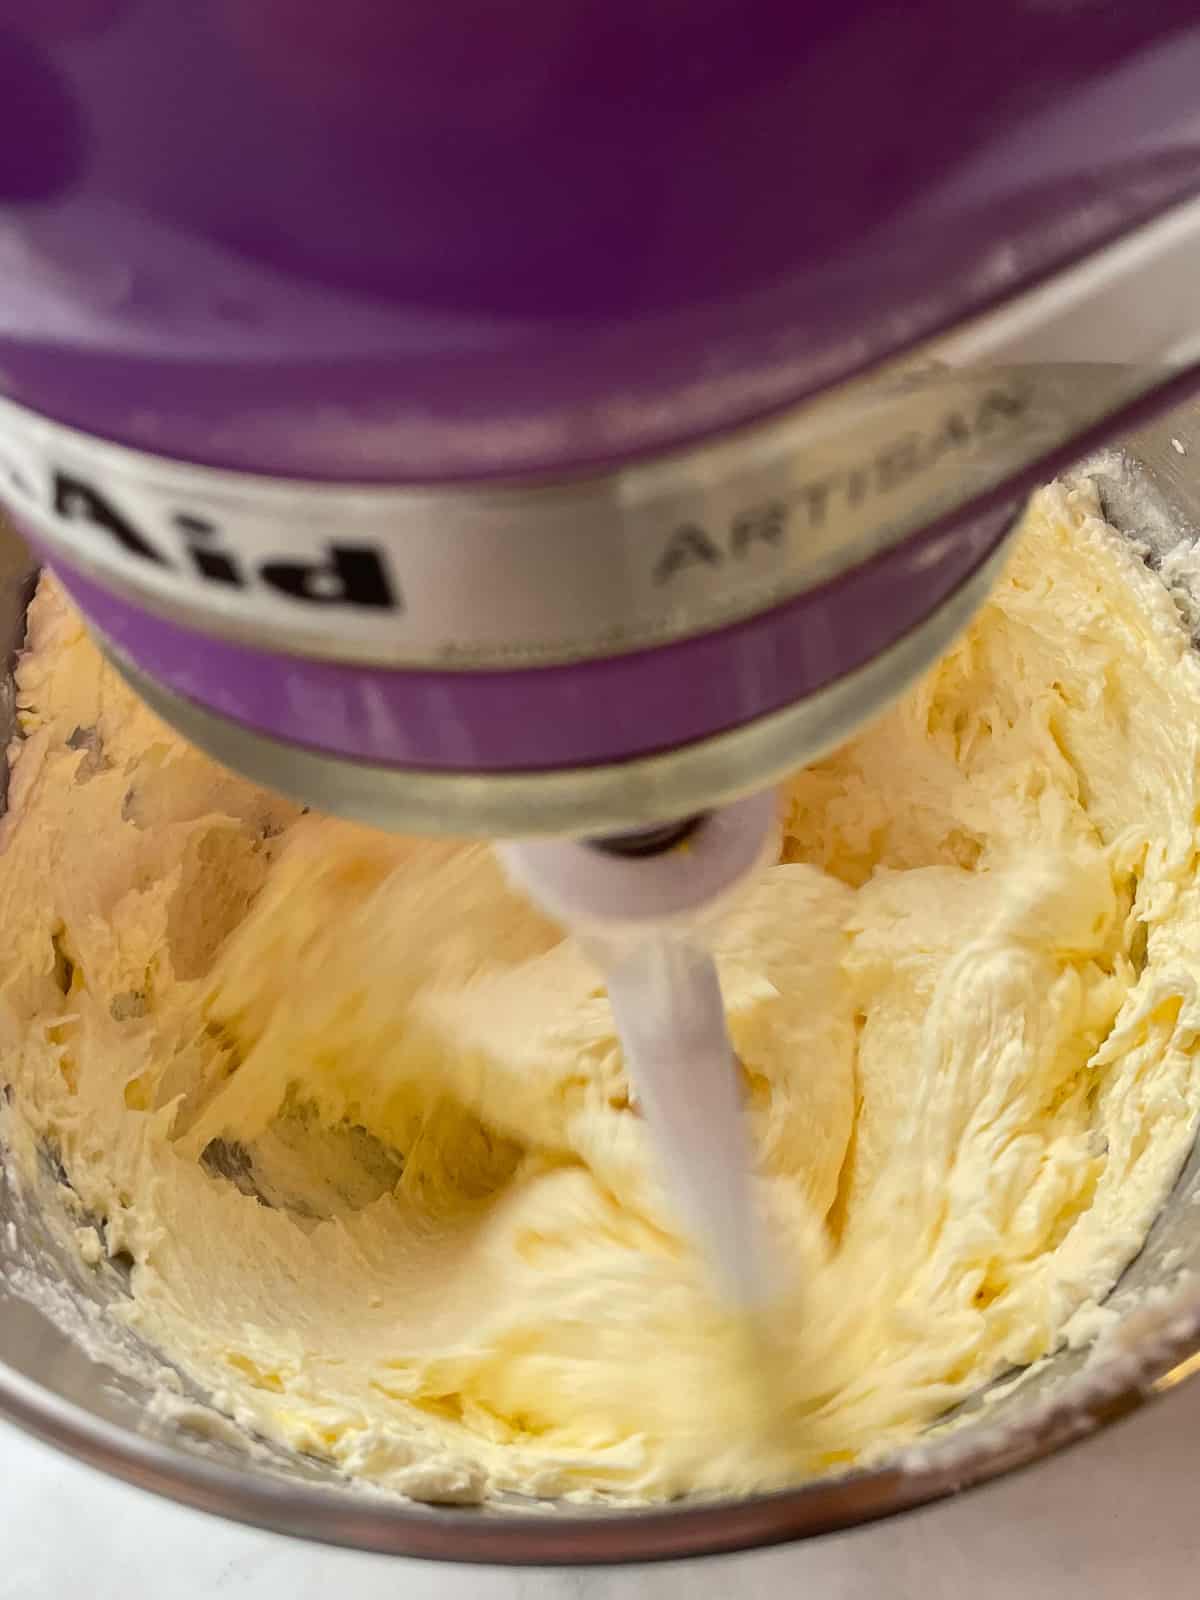 Mixing butter, sugar, and eggs for a gluten-free pound cake.